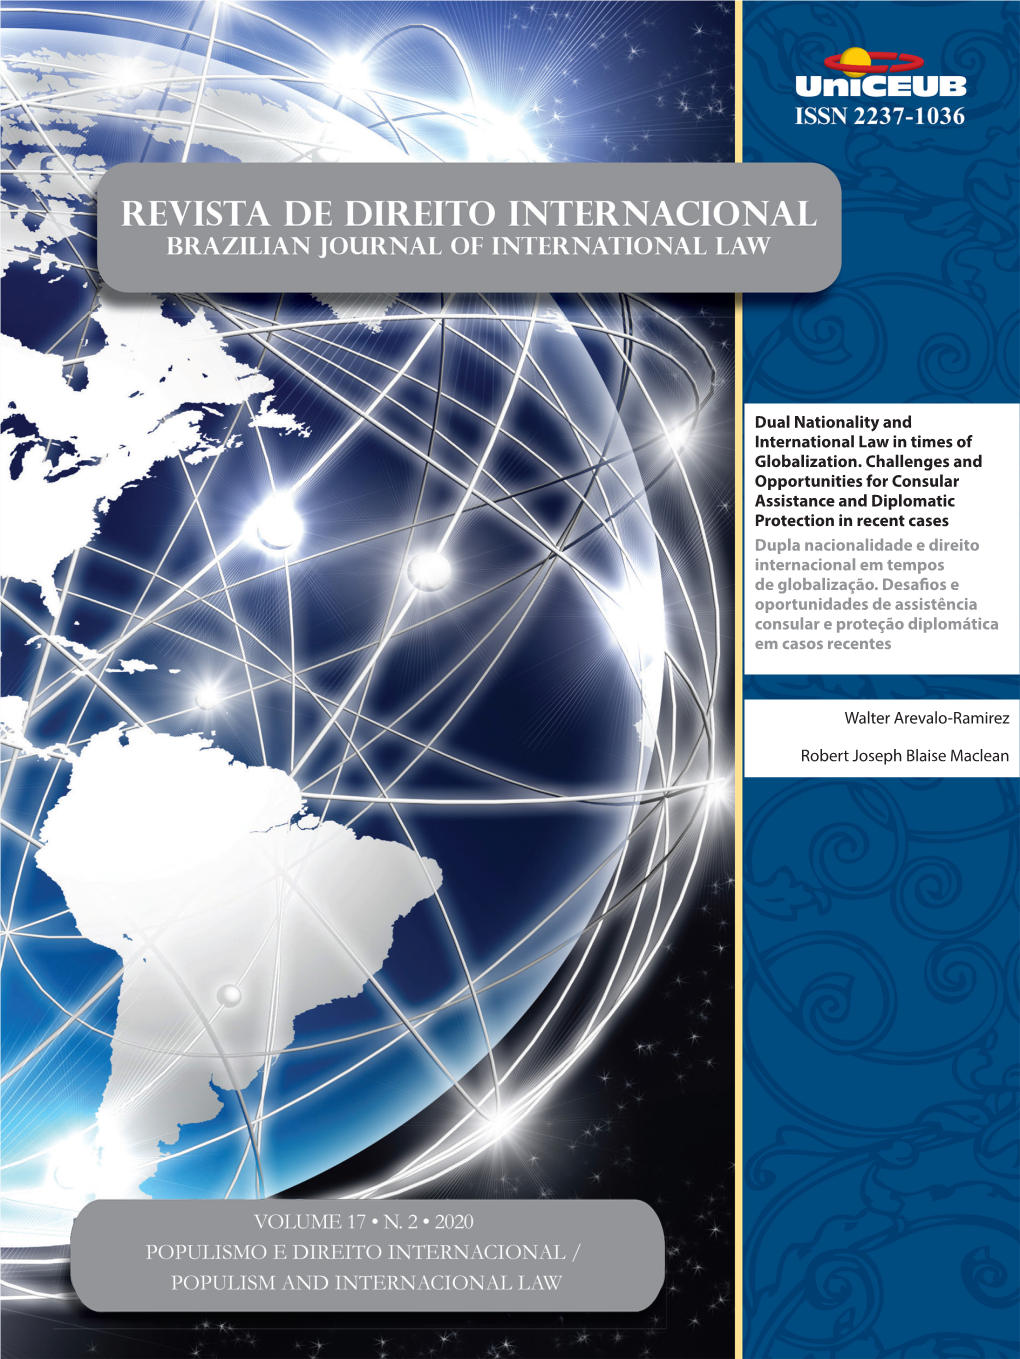 Dual Nationality and International Law in Times of Globalization